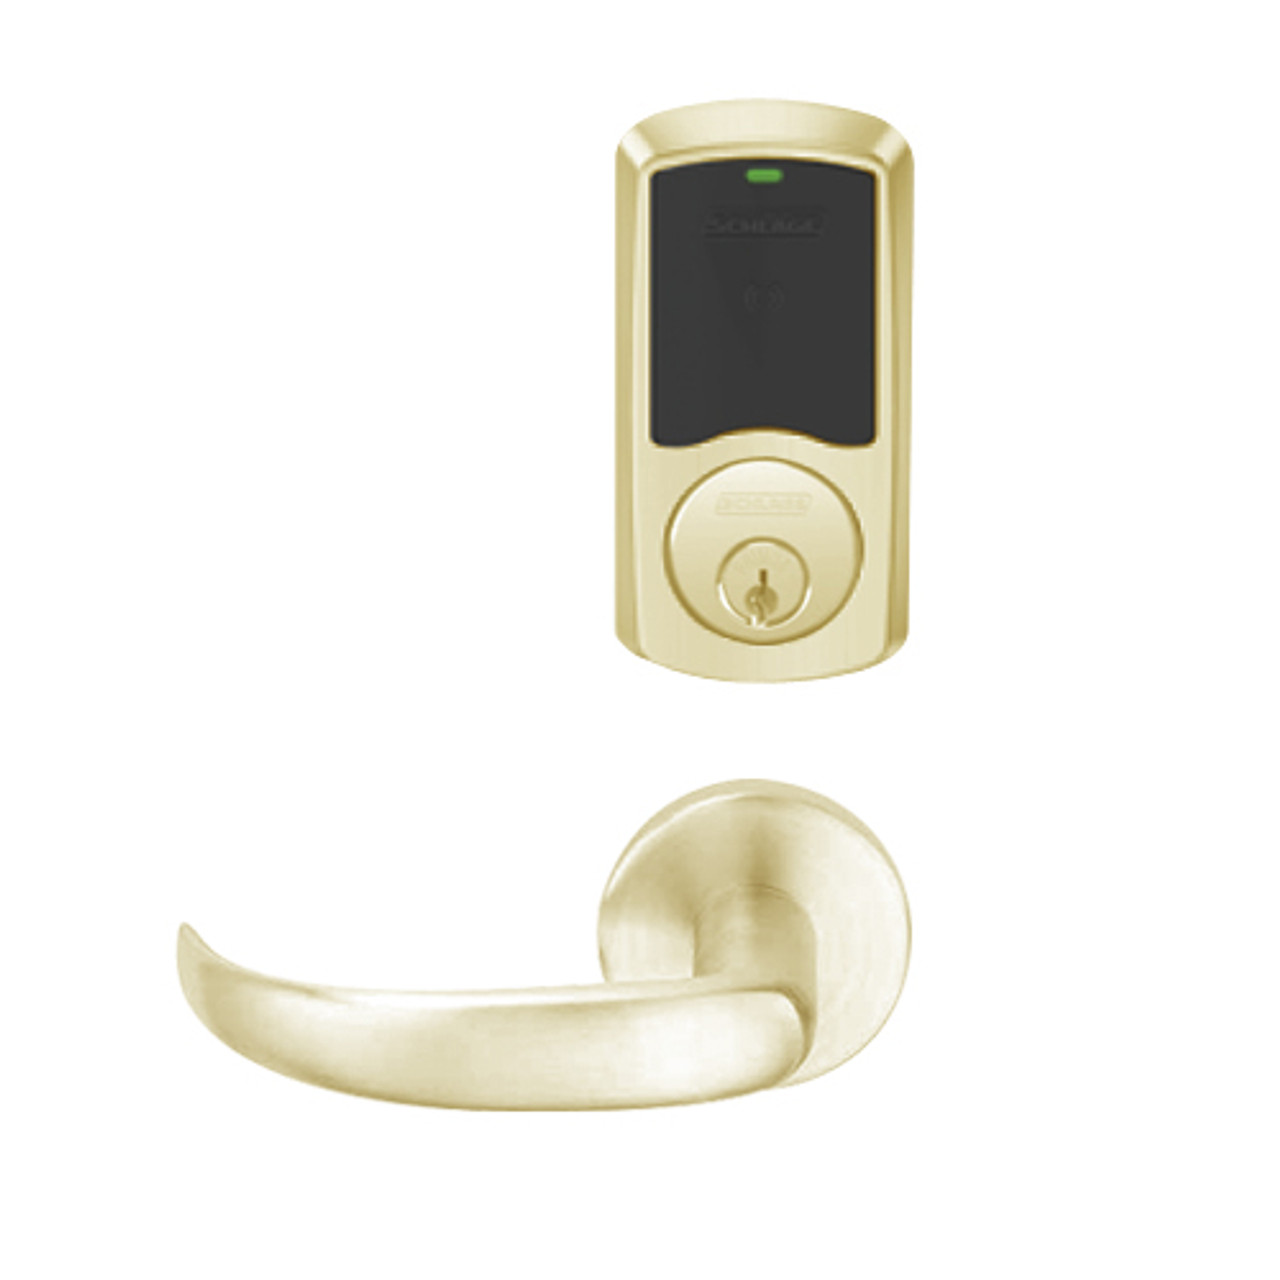 LEMB-GRW-P-17-606-00A Schlage Privacy/Office Wireless Greenwich Mortise Lock with Push Button & LED Indicator and Sparta Lever in Satin Brass